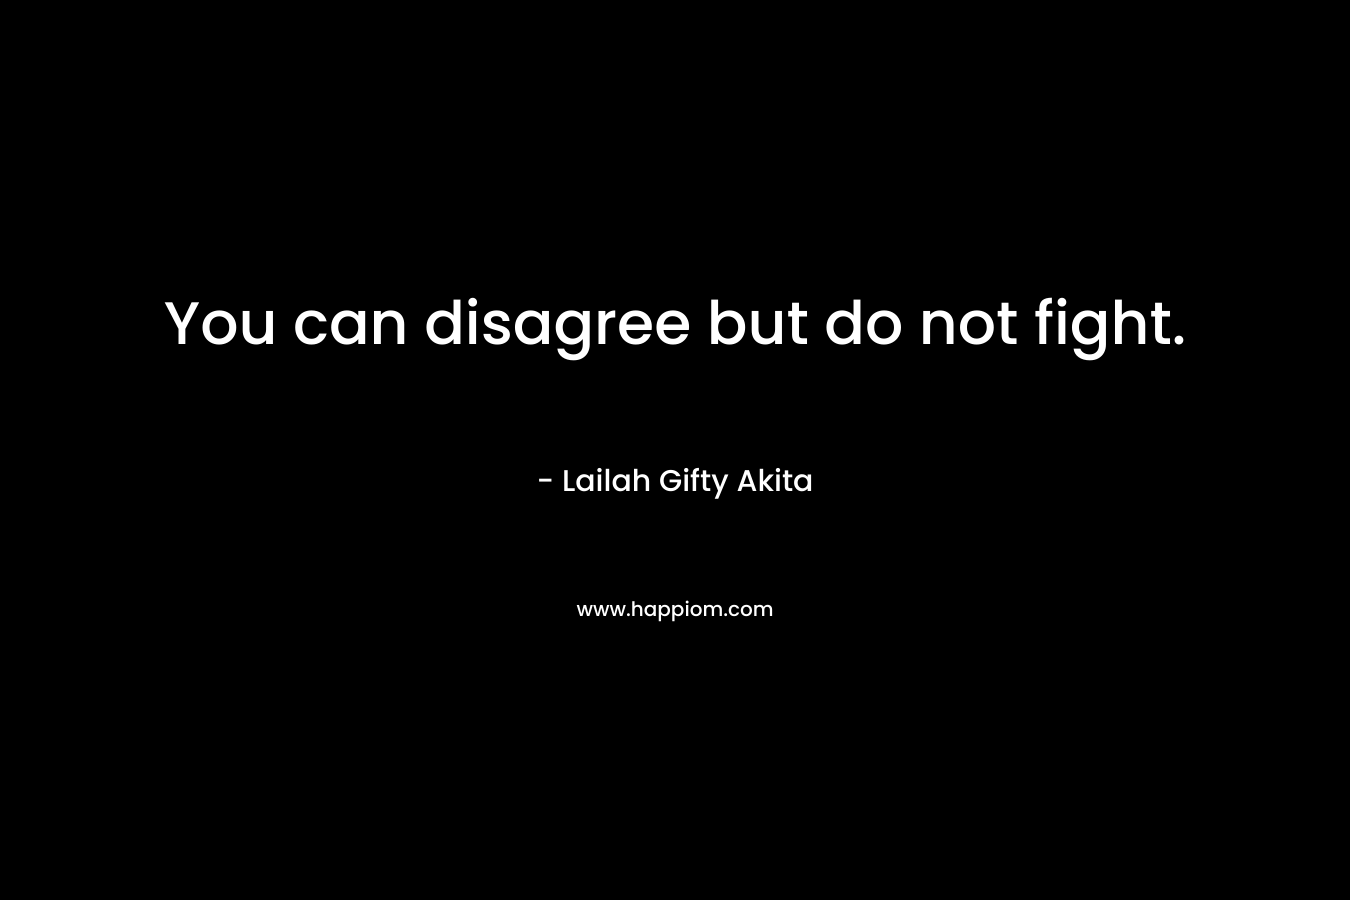 You can disagree but do not fight.